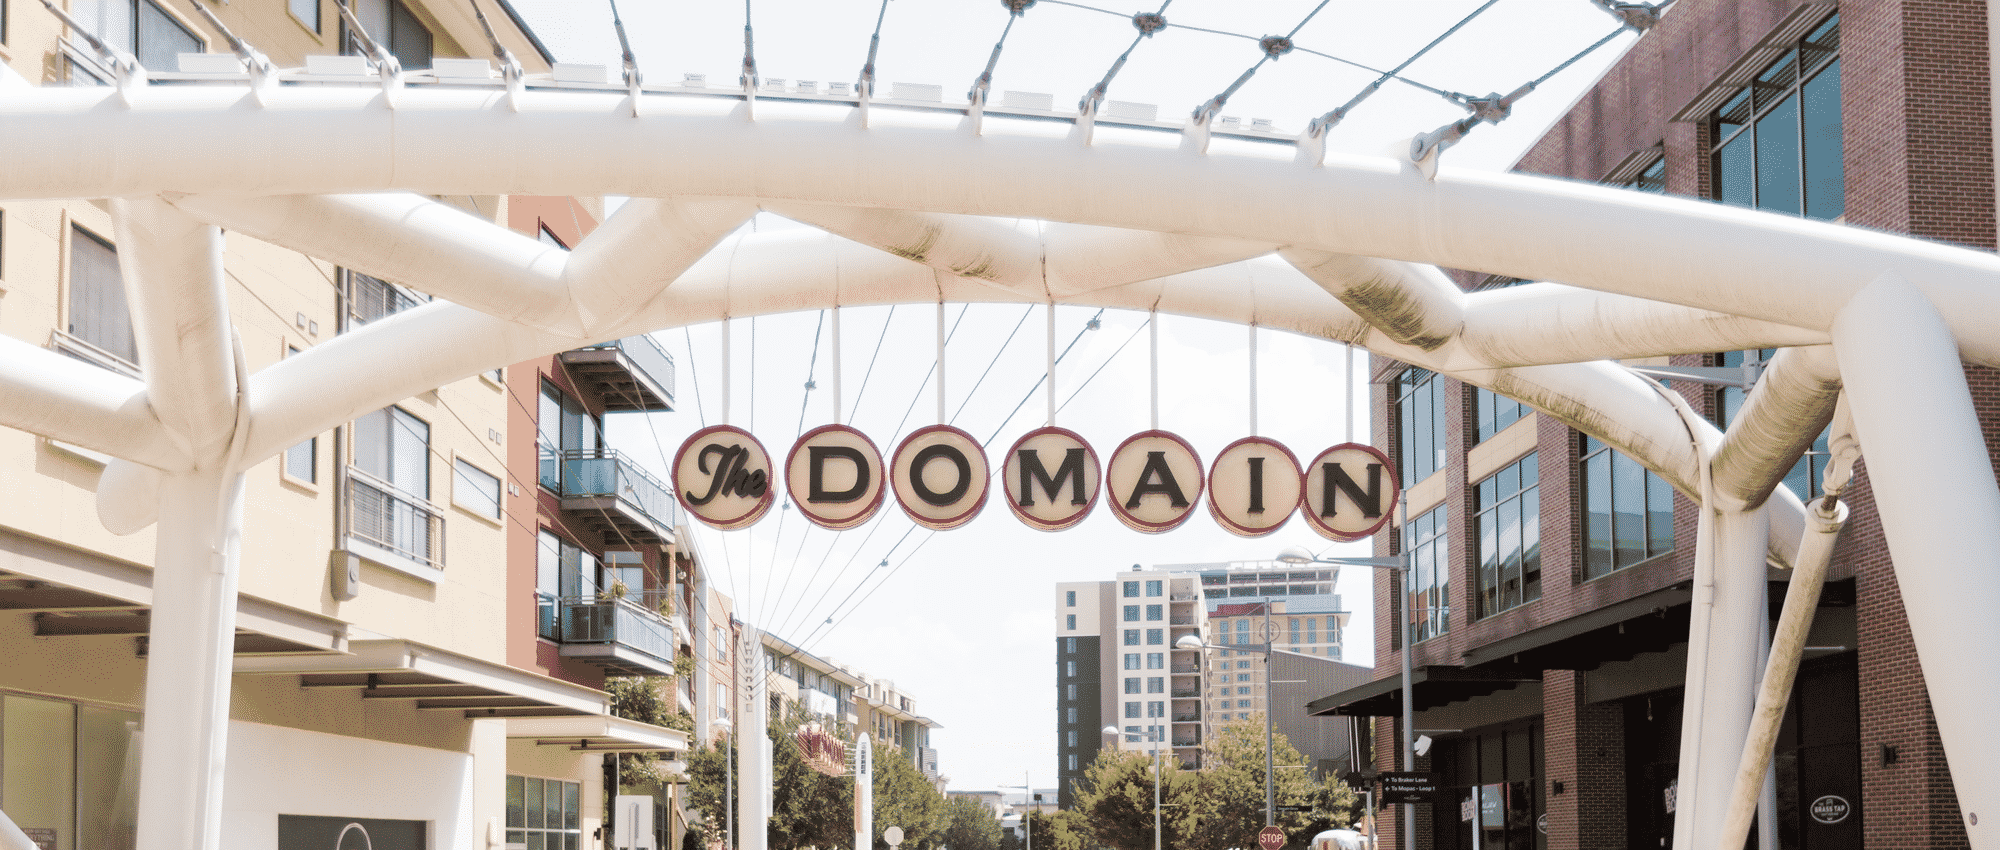 The Domain: Downtown in North Austin, TX